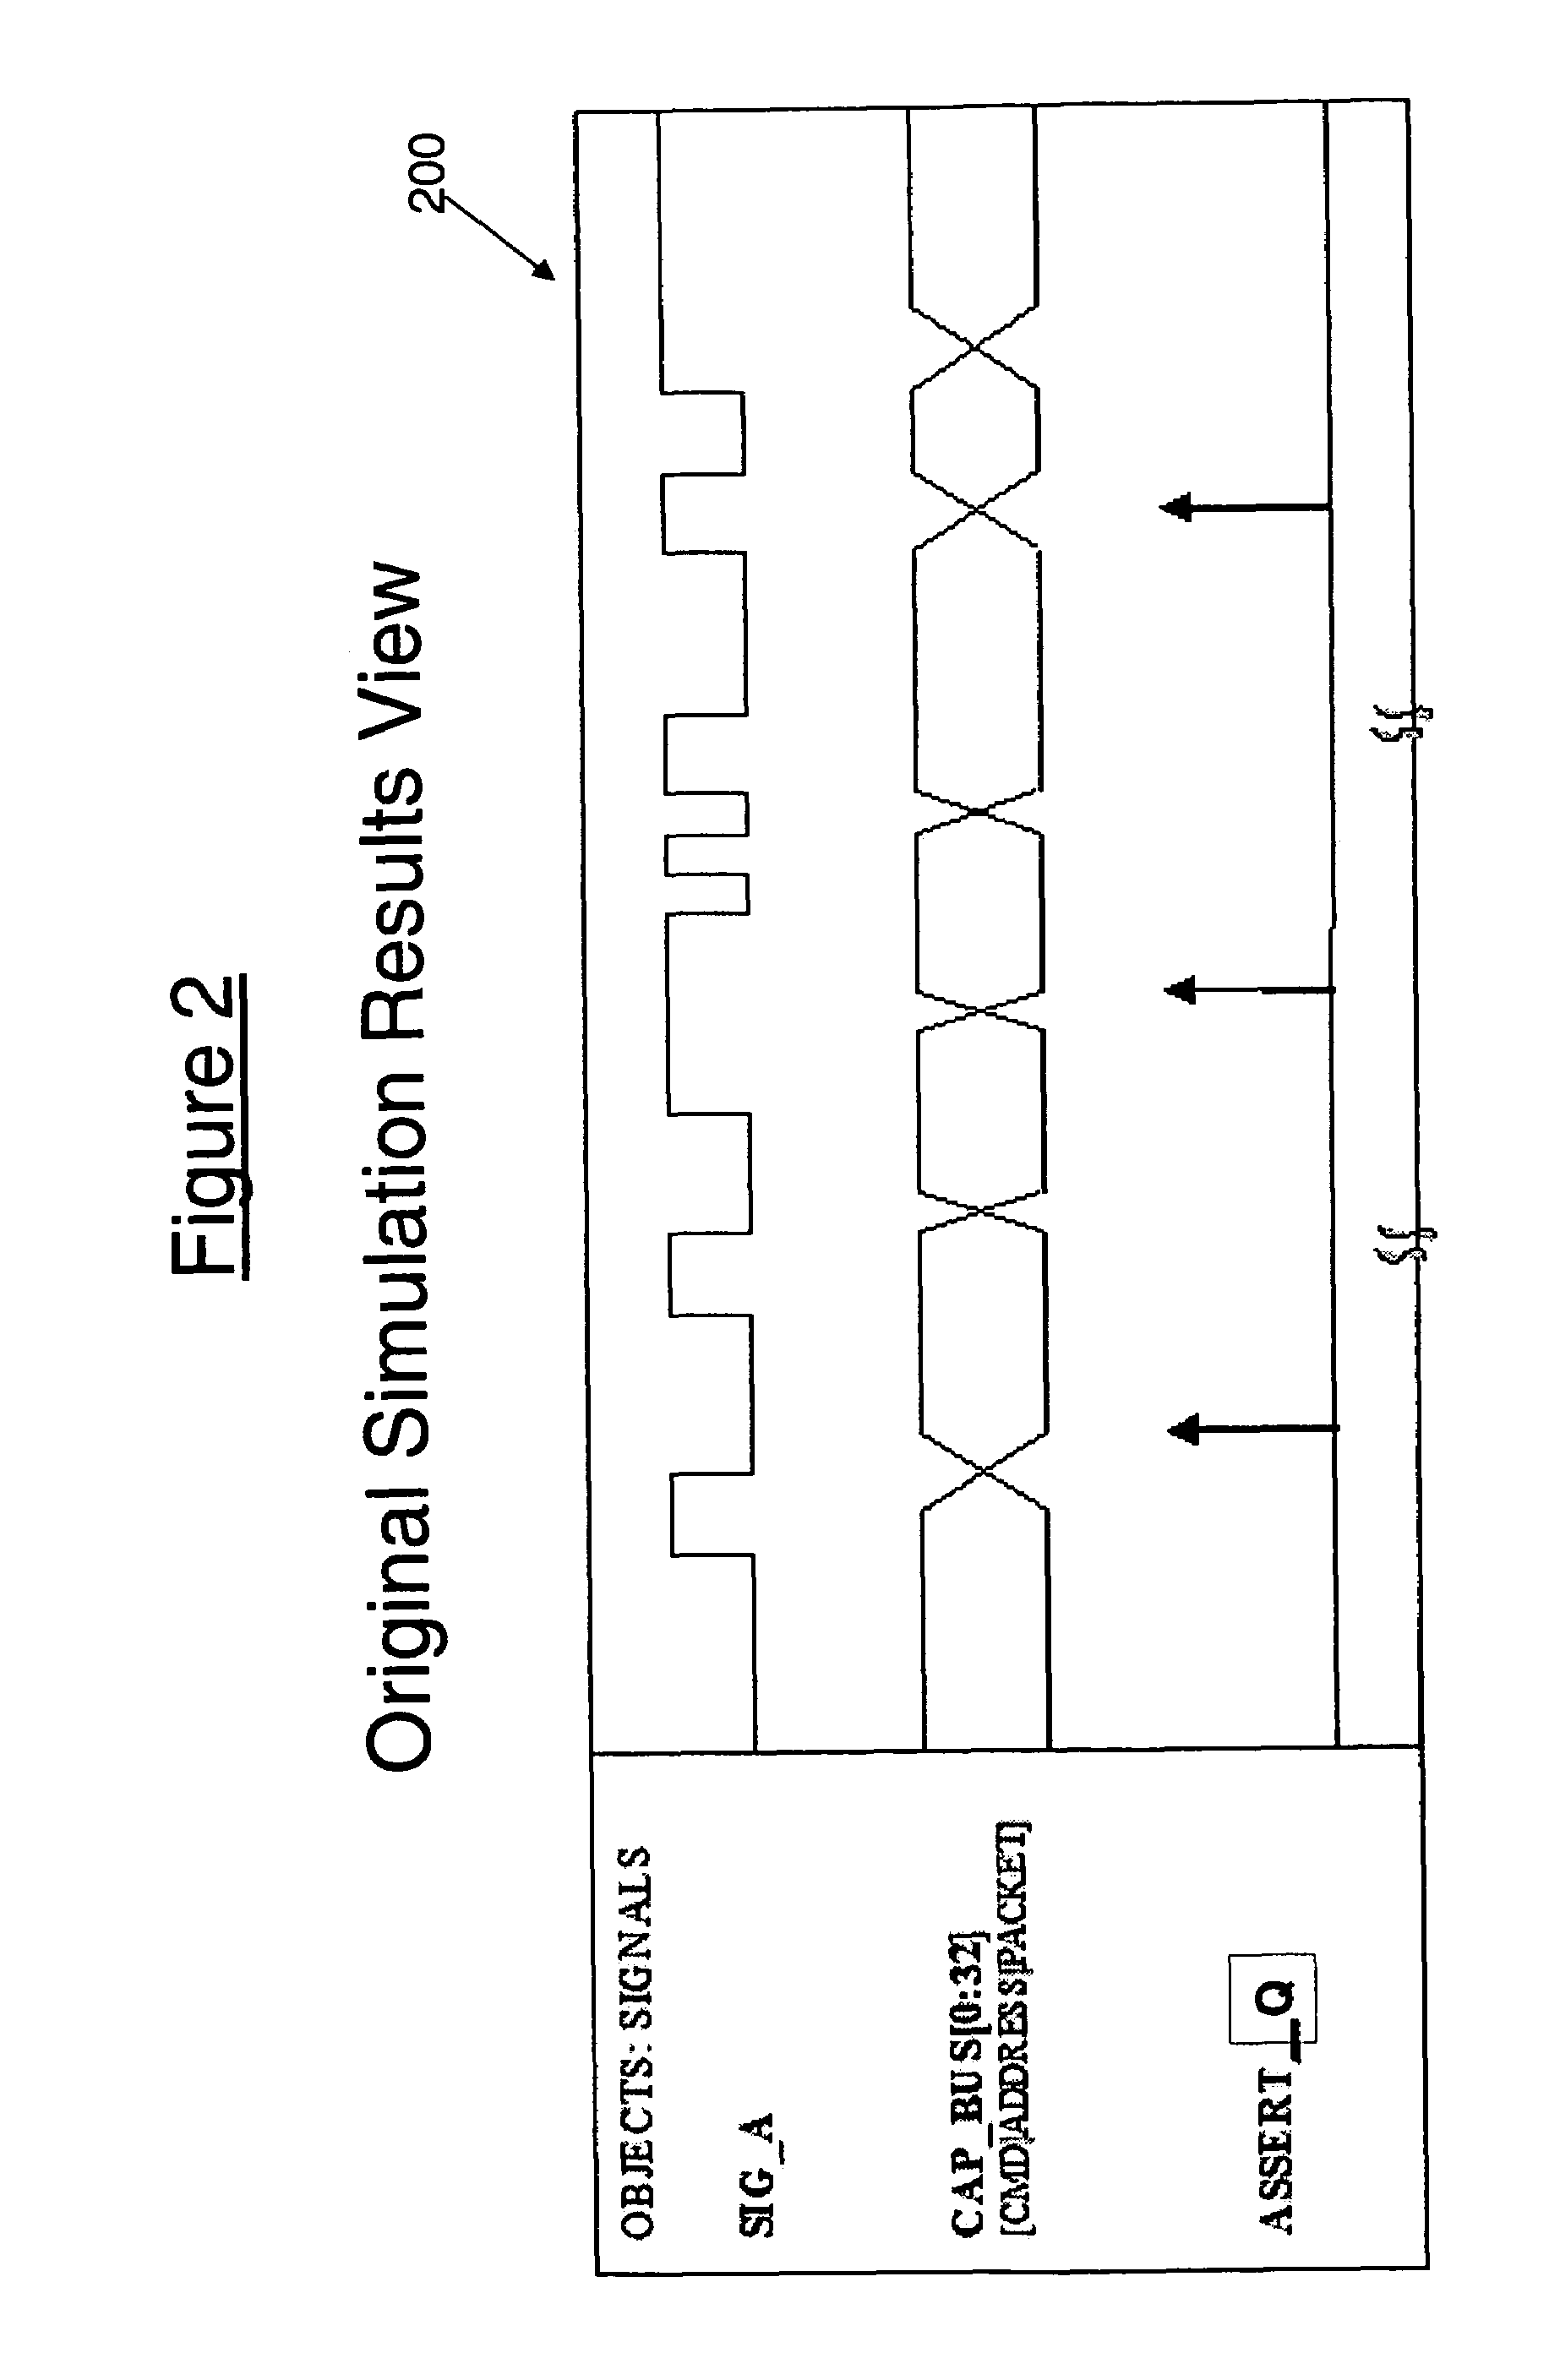 Stimulus extraction and sequence generation for an electric device under test